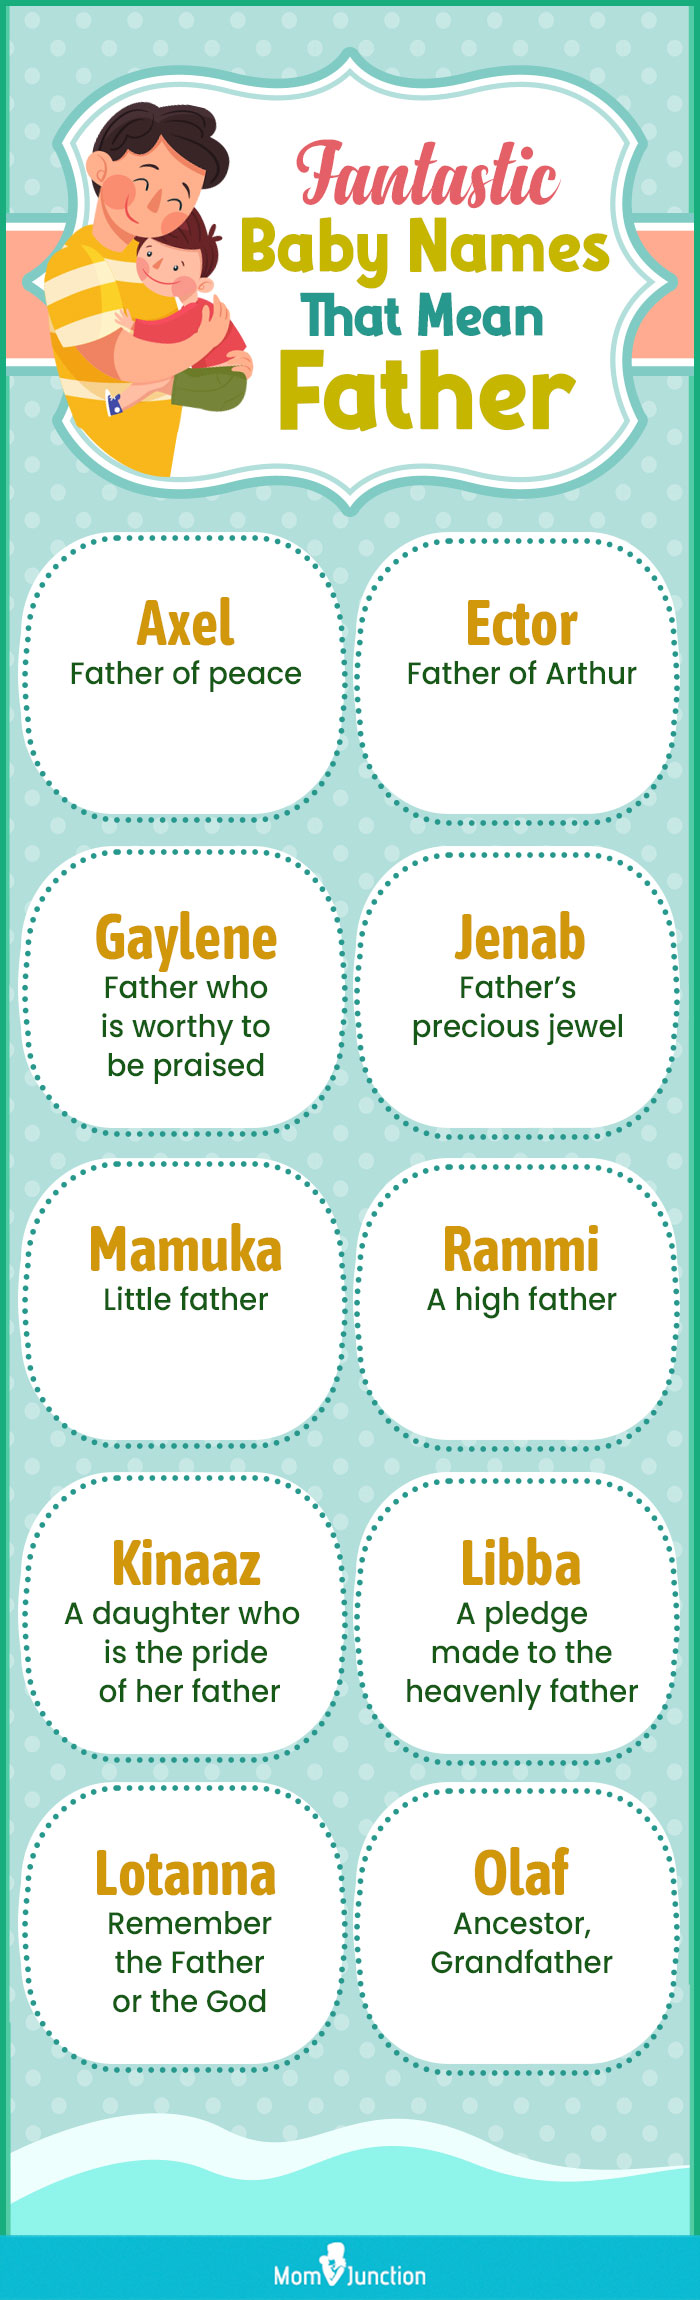 fantastic baby names that mean father (infographic)